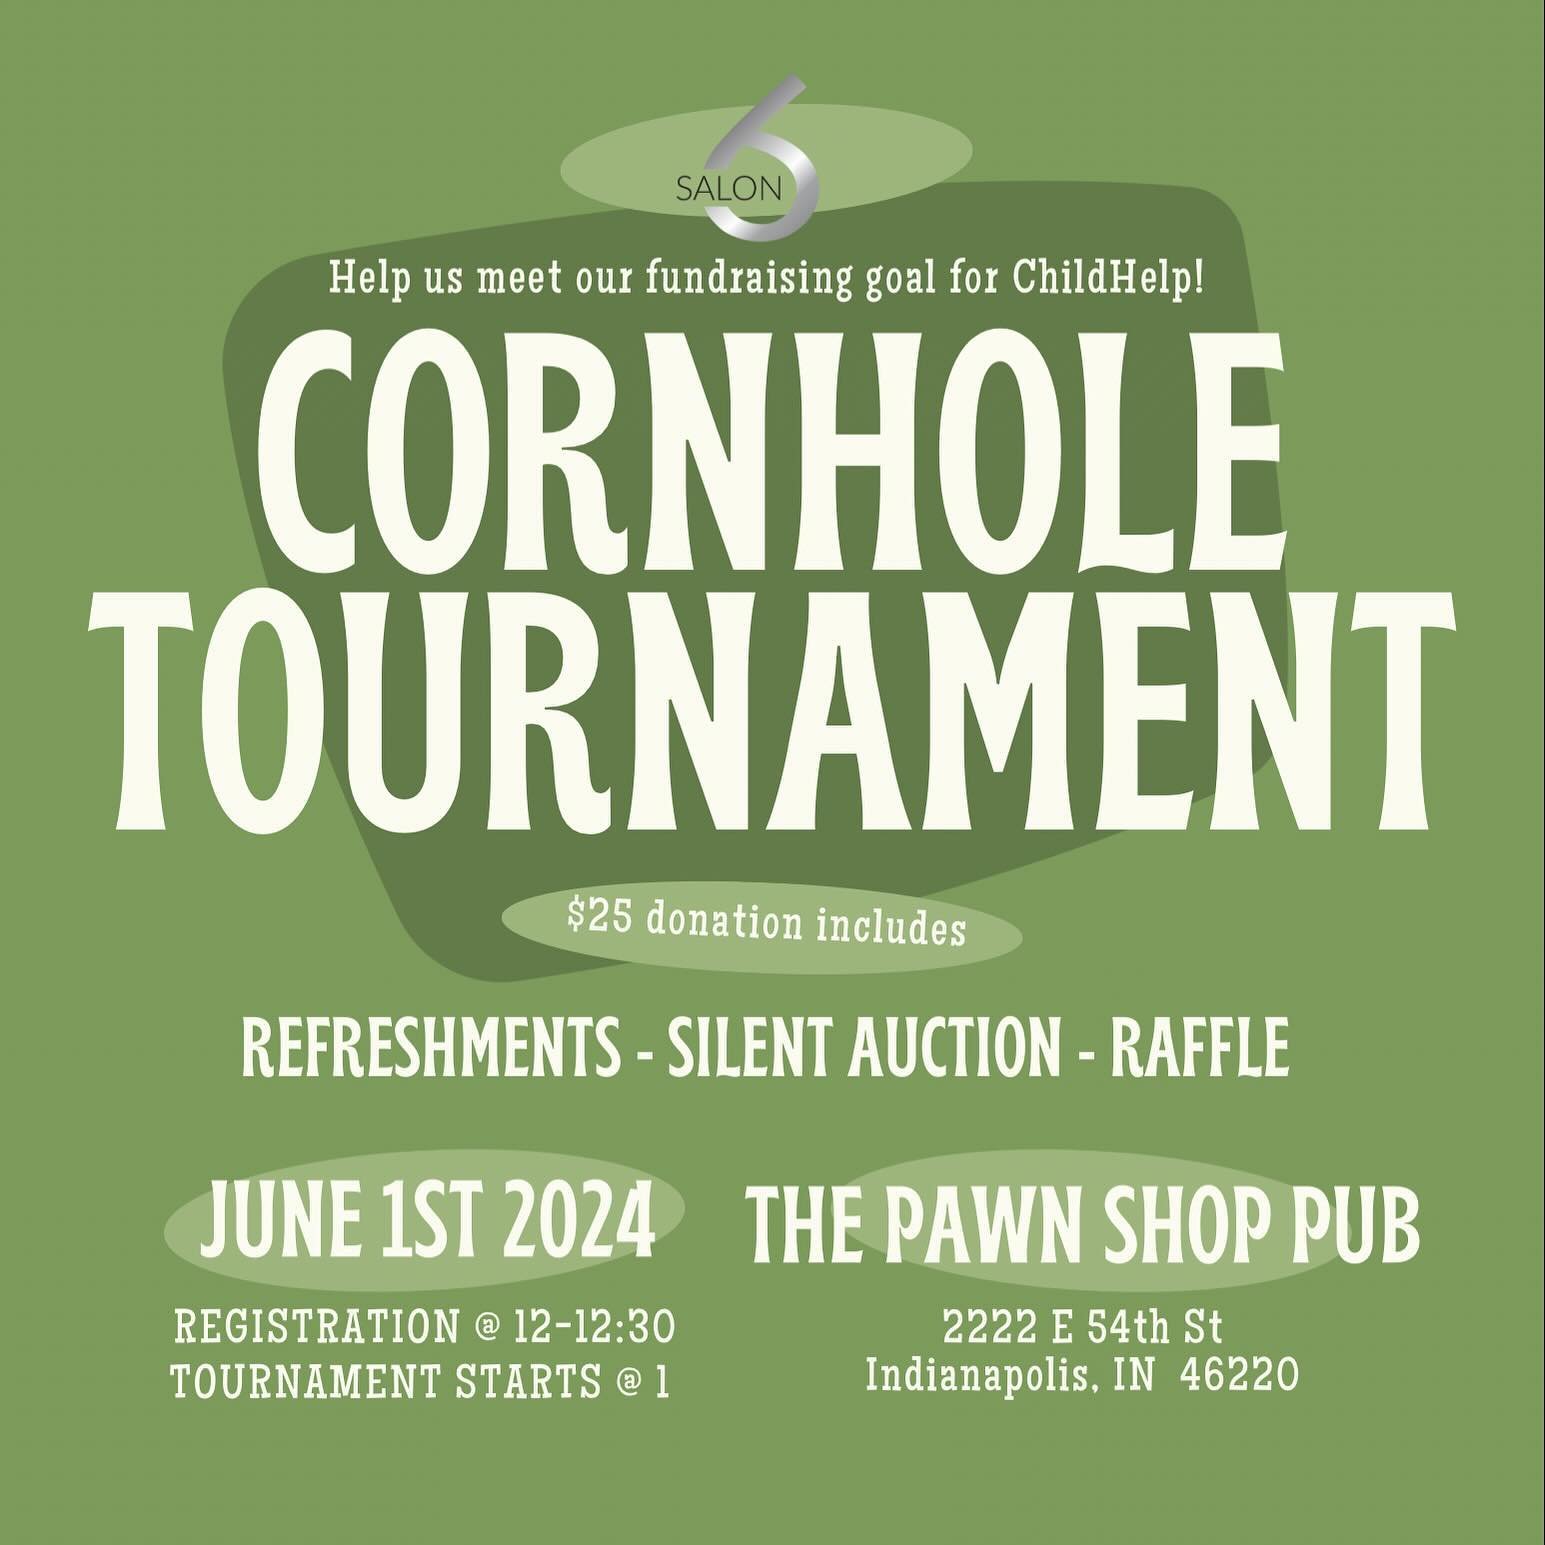 GUESS WHO&rsquo;S BACK! 
Get ready for our annual Salon 6 Cornhole Tournament! Come out and help us meet our fundraising goal for @childhelp! Your $25 donation includes beer 🍻, a silent auction and a 50/50 raffle! 🎟️
.
.
.
.
.
.
#salon6
#broadrippl